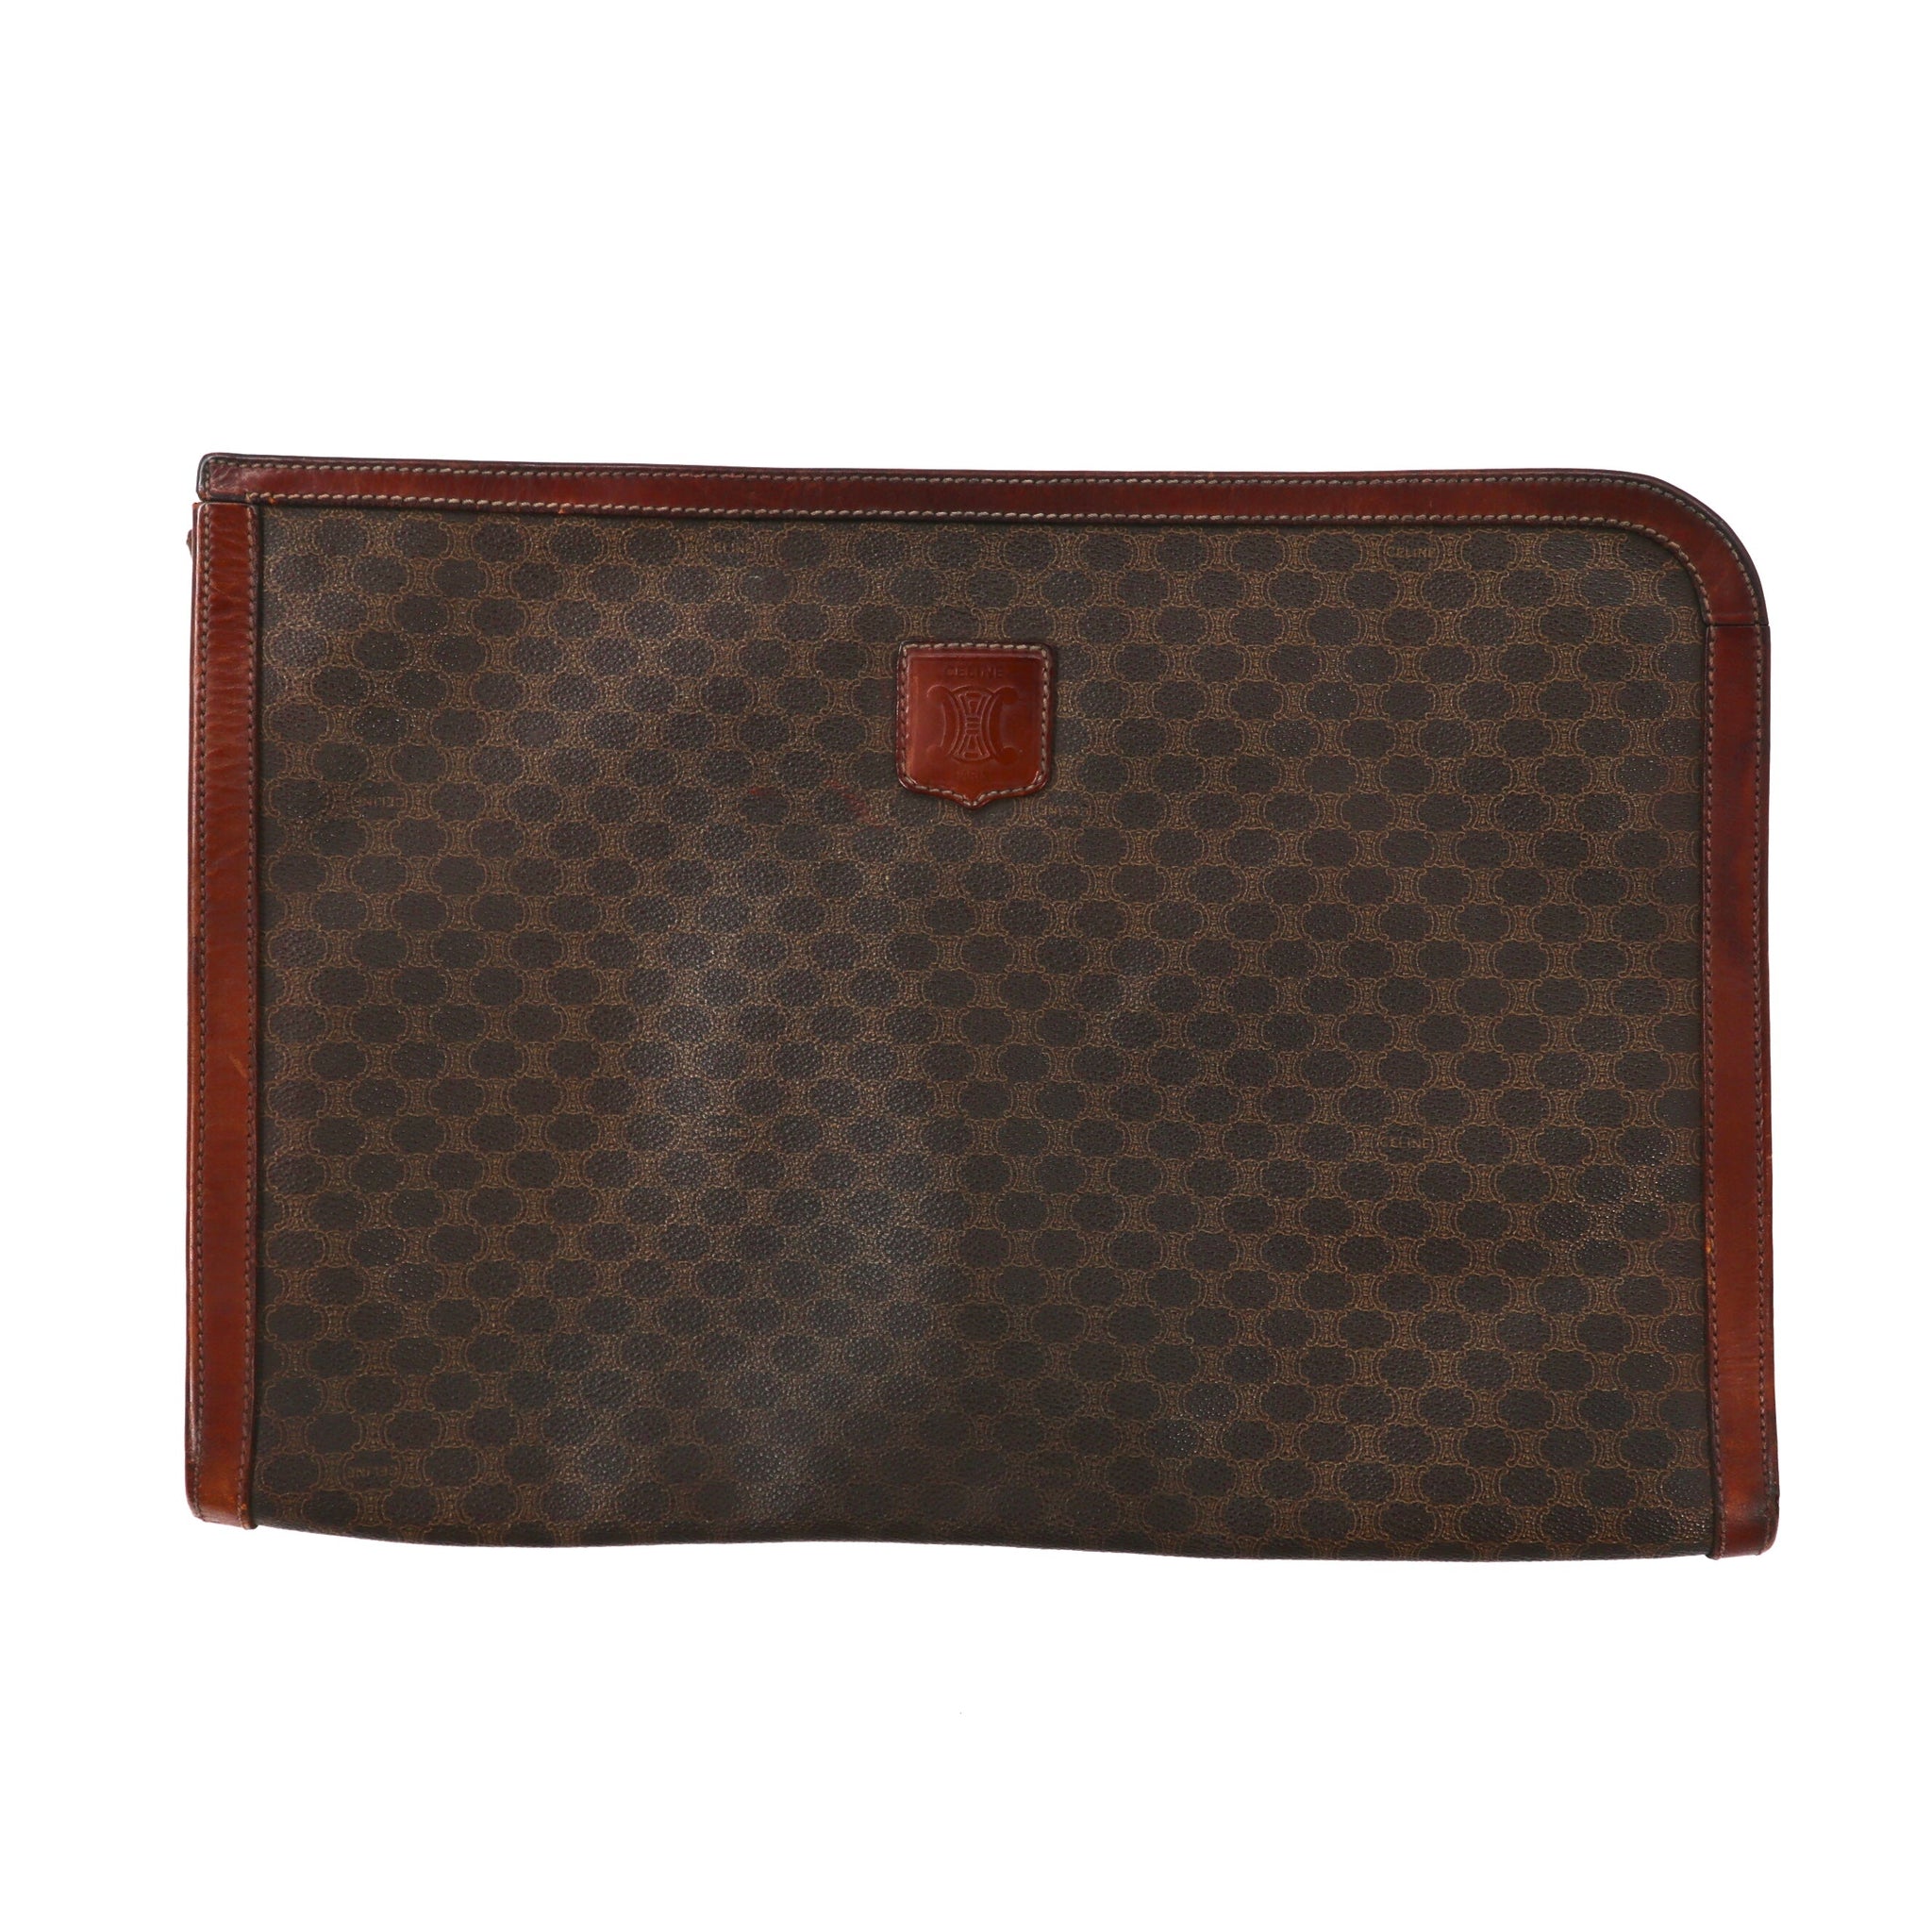 CELINE Clutch Bag Pouch Brown Leather Macadam Pattern M Made in